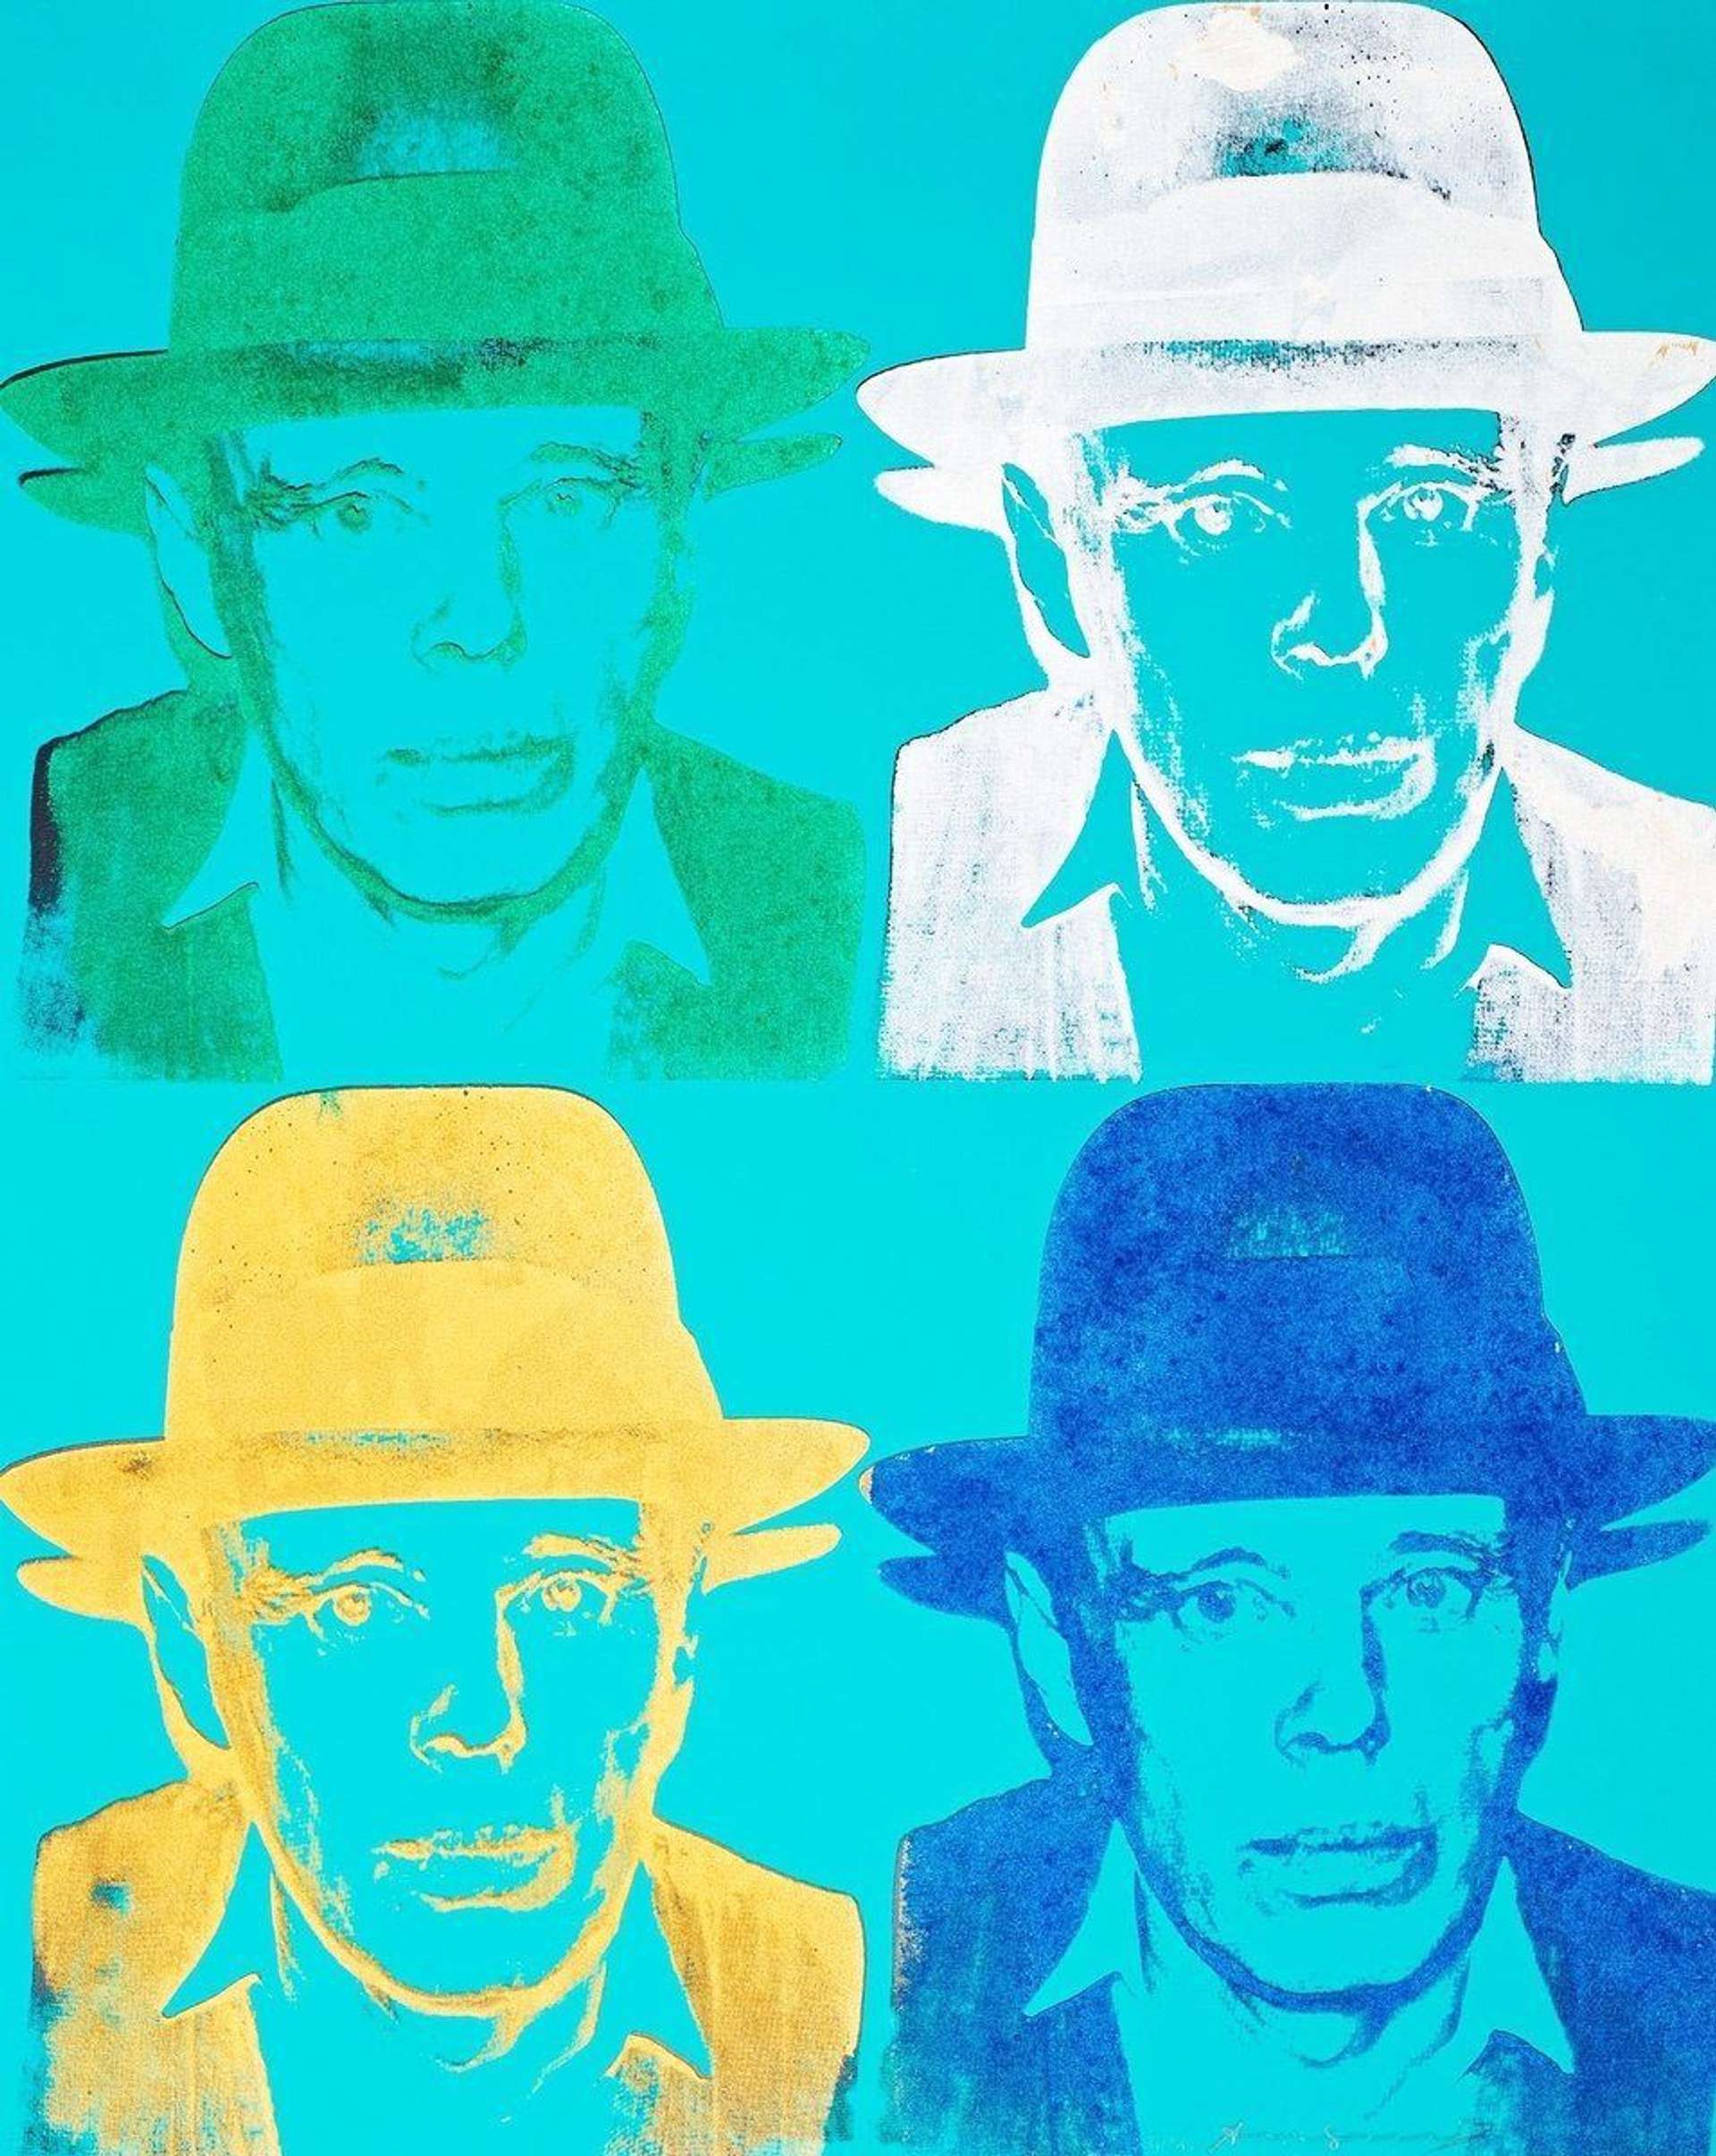 Joseph Beuys by Andy Warhol